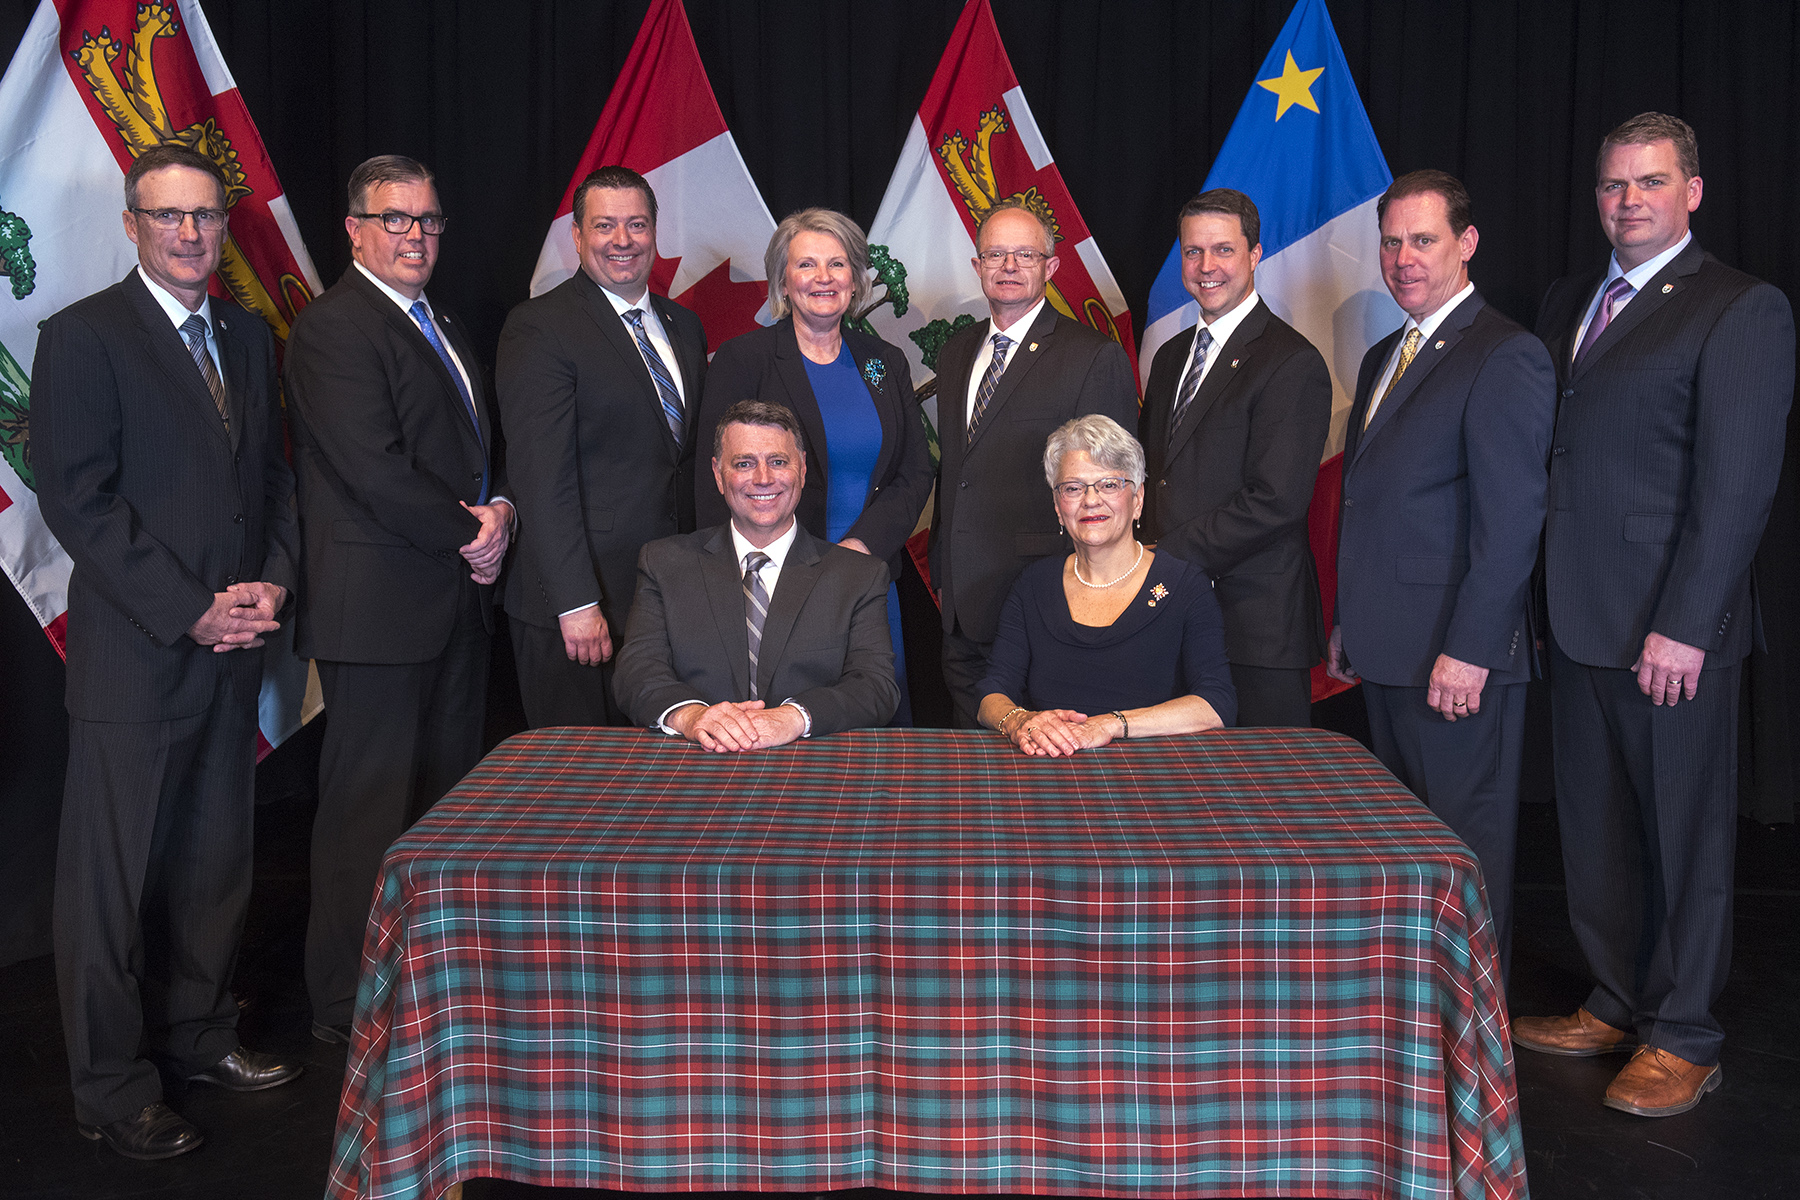 Premier King and Cabinet